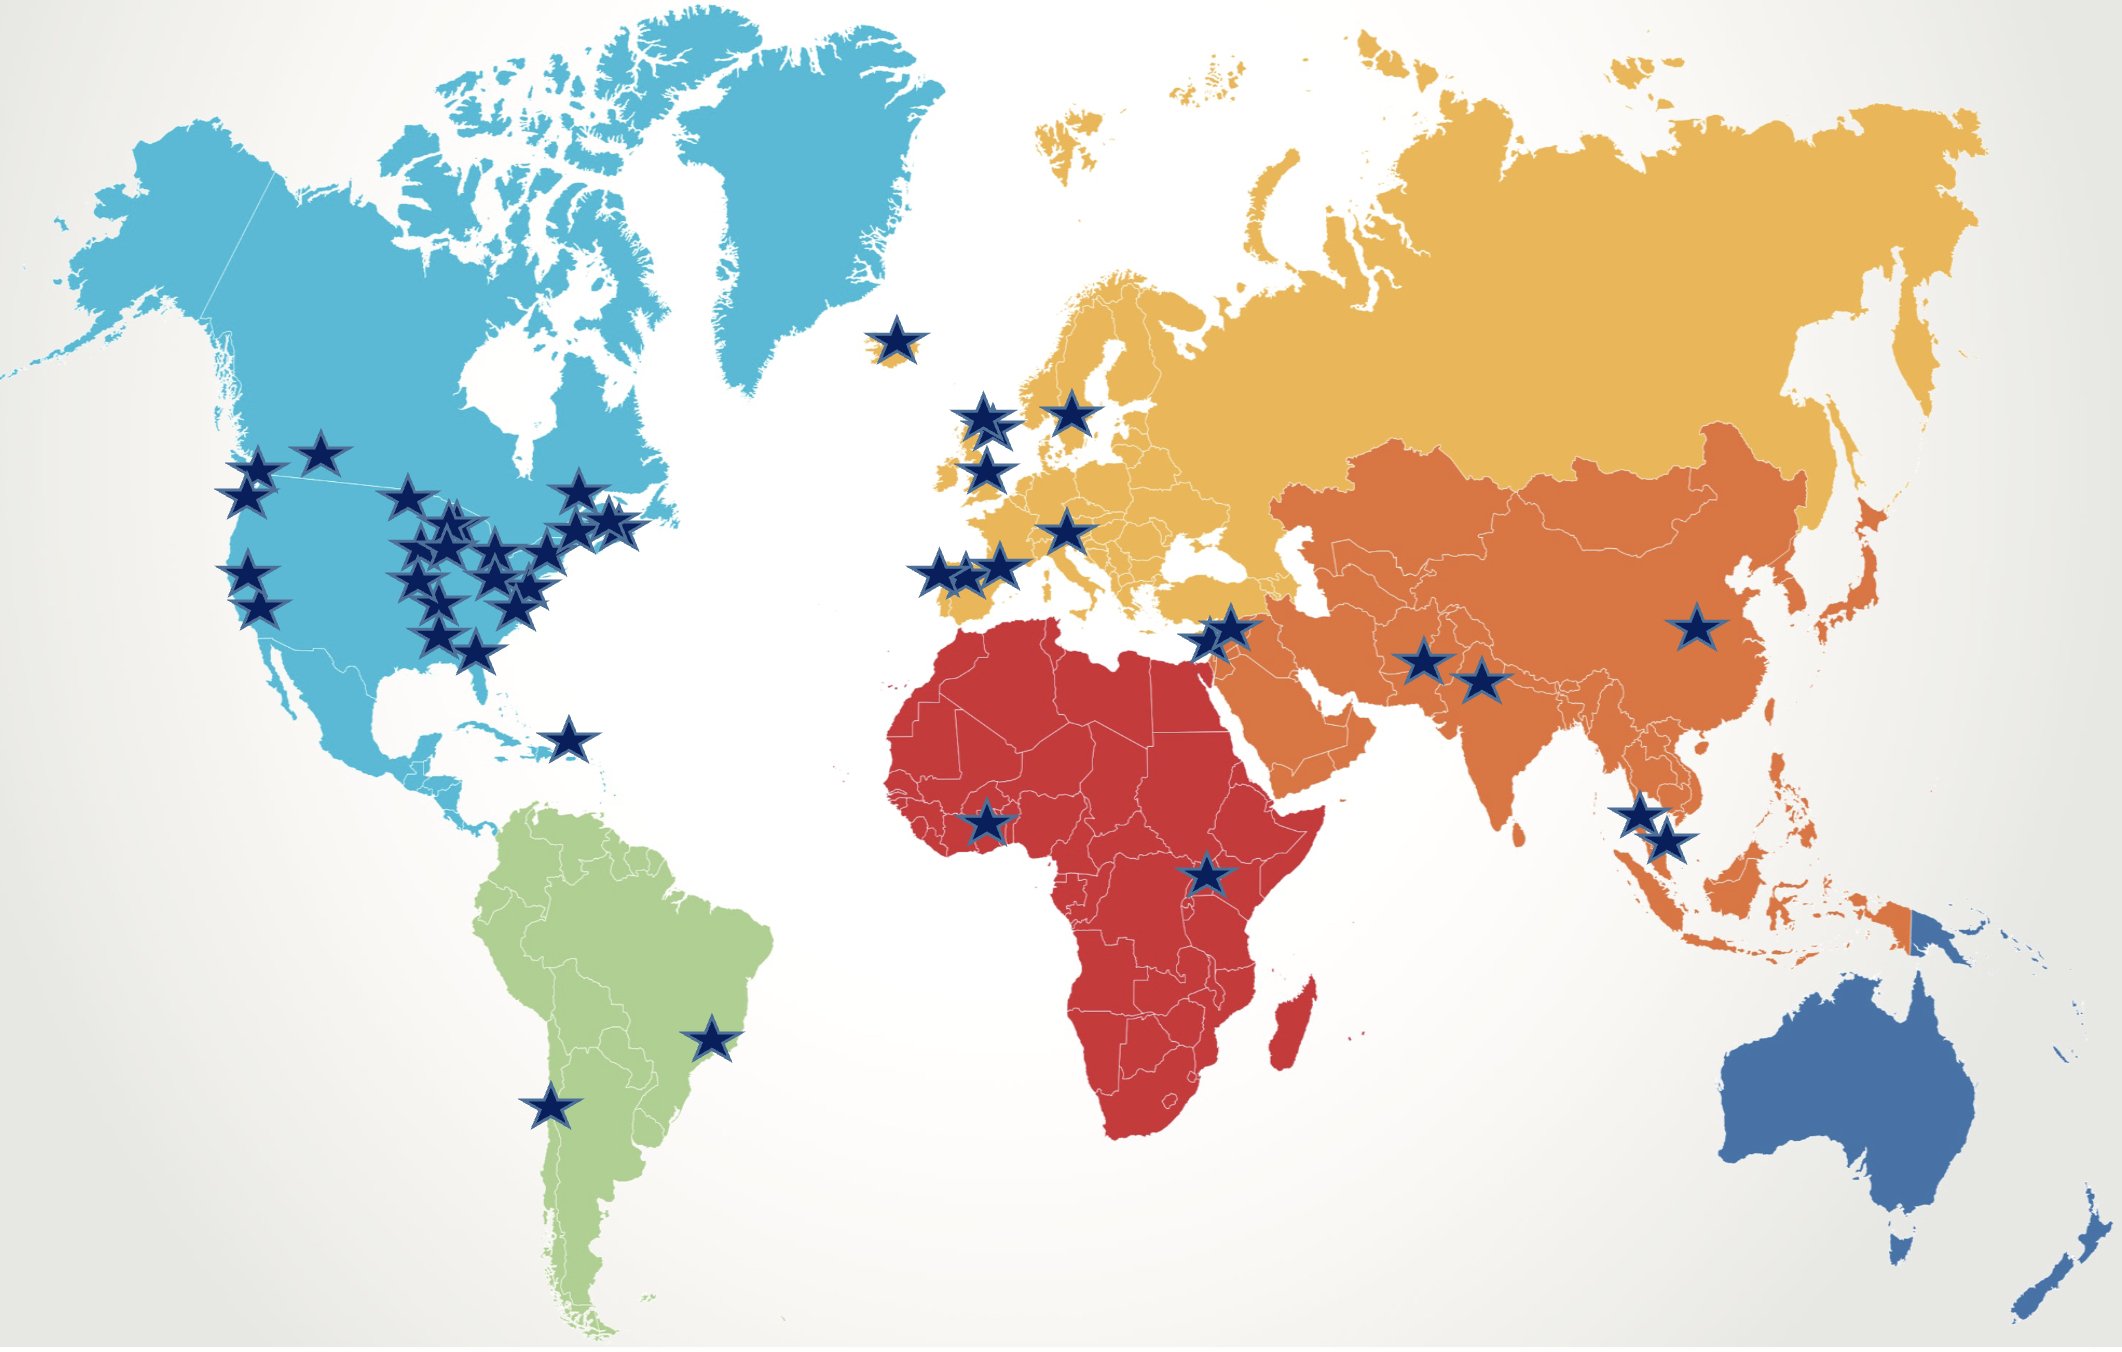 Global map using star icons to denote where the partner schools are located in the R3ISE Network.